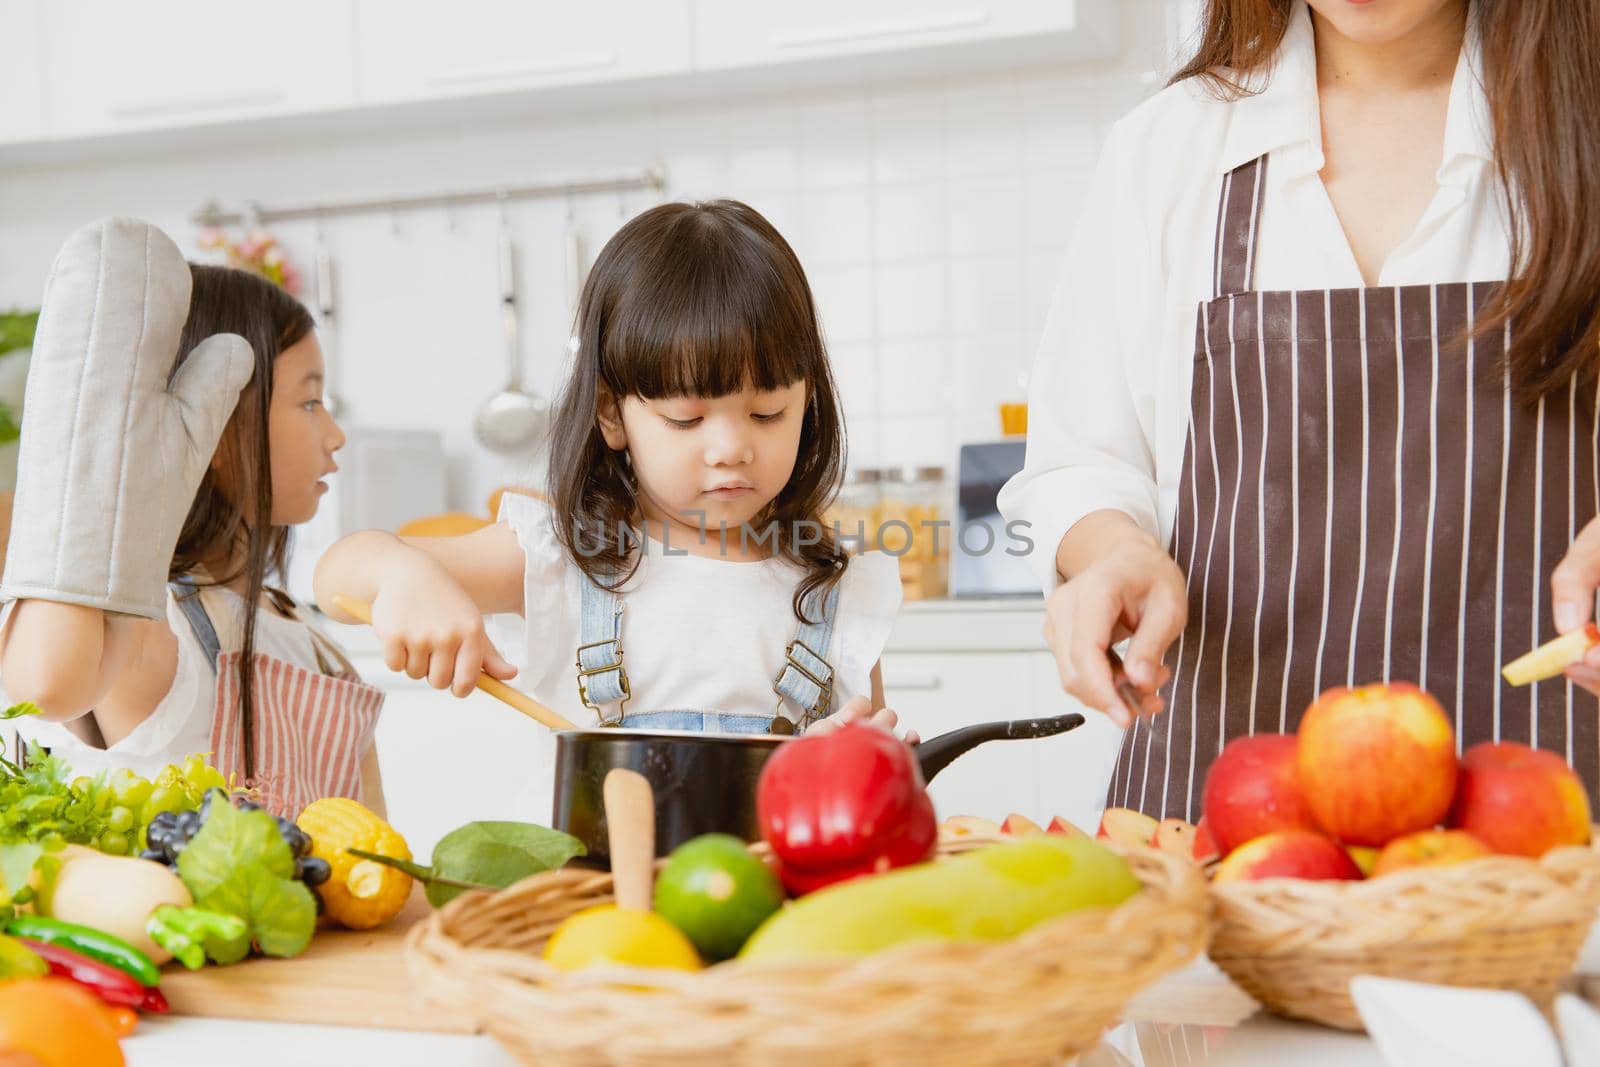 Little girl childs enjoy playing cooking with mom and older sister together at home kitchen holiday by qualitystocks